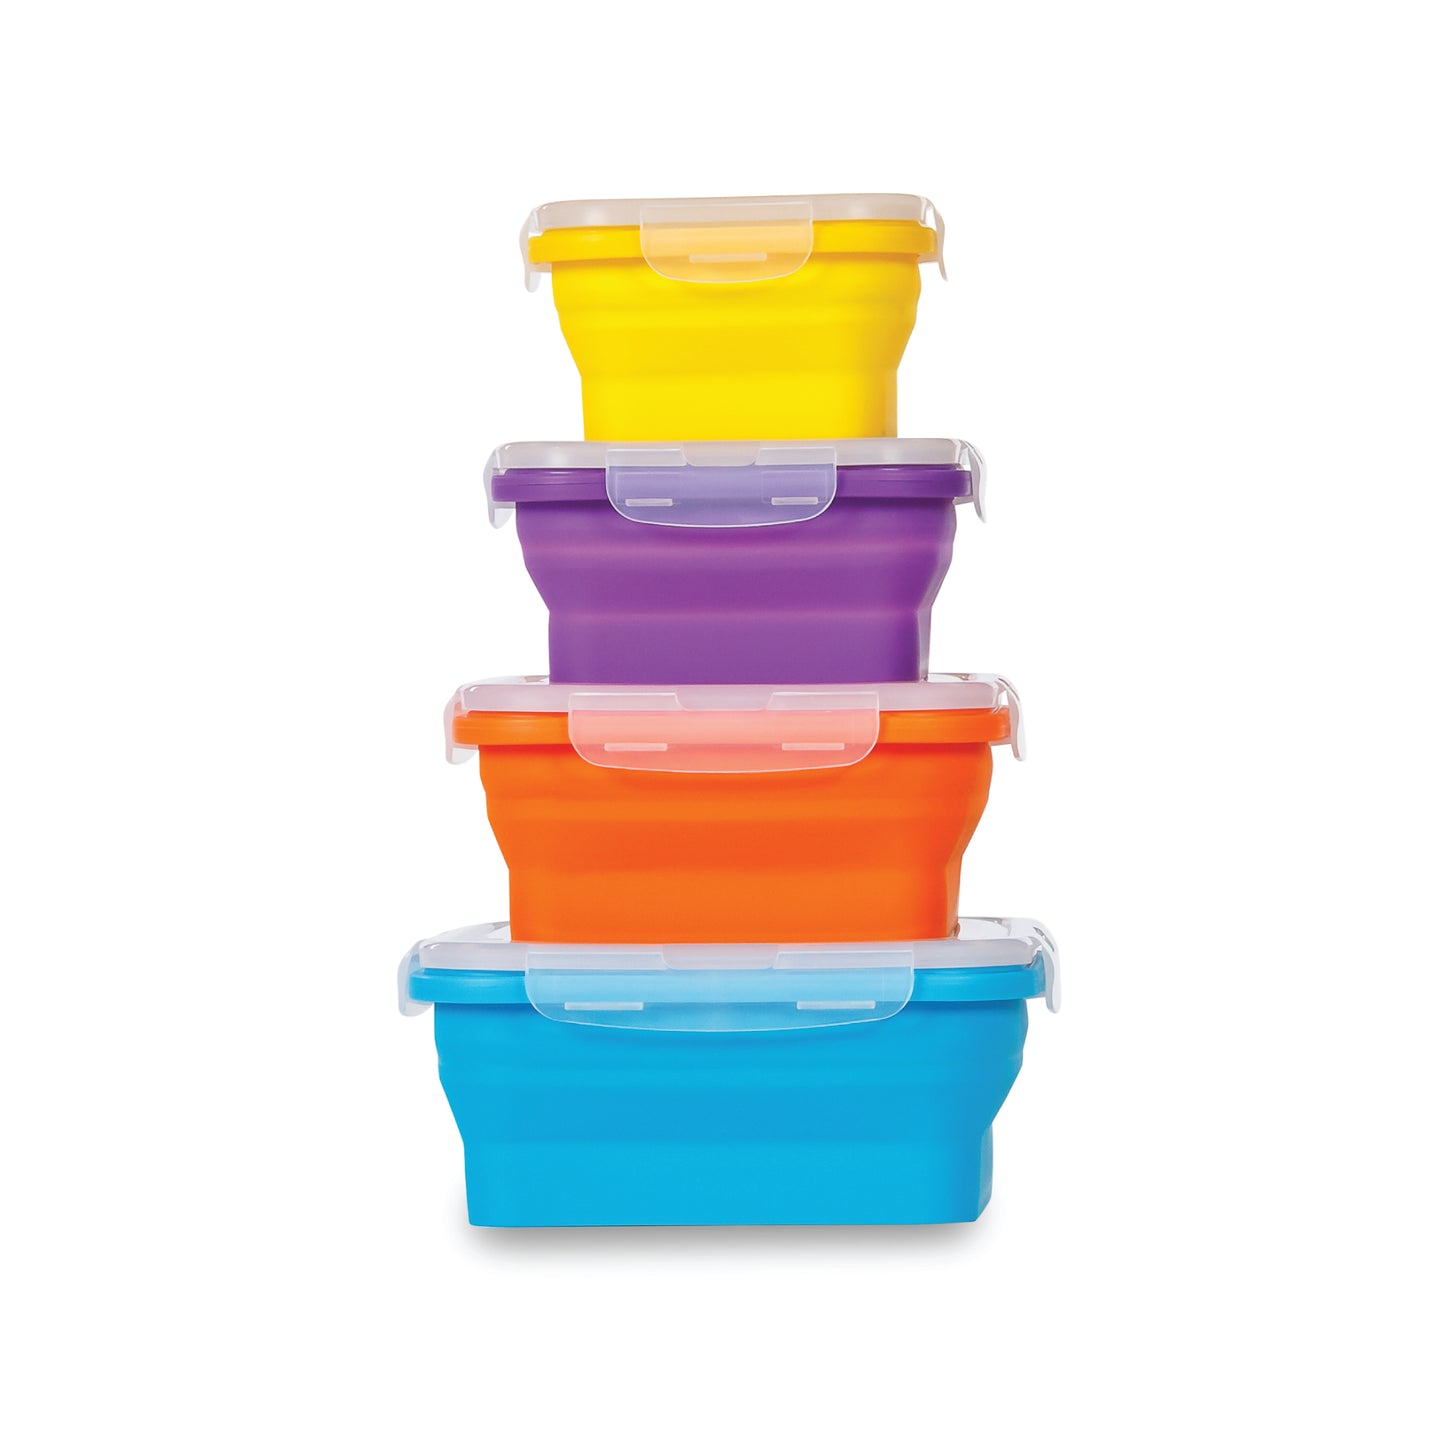 FLAT STACKS 4 PC. SQUARE CONTAINER SET - Ocean Sales USA